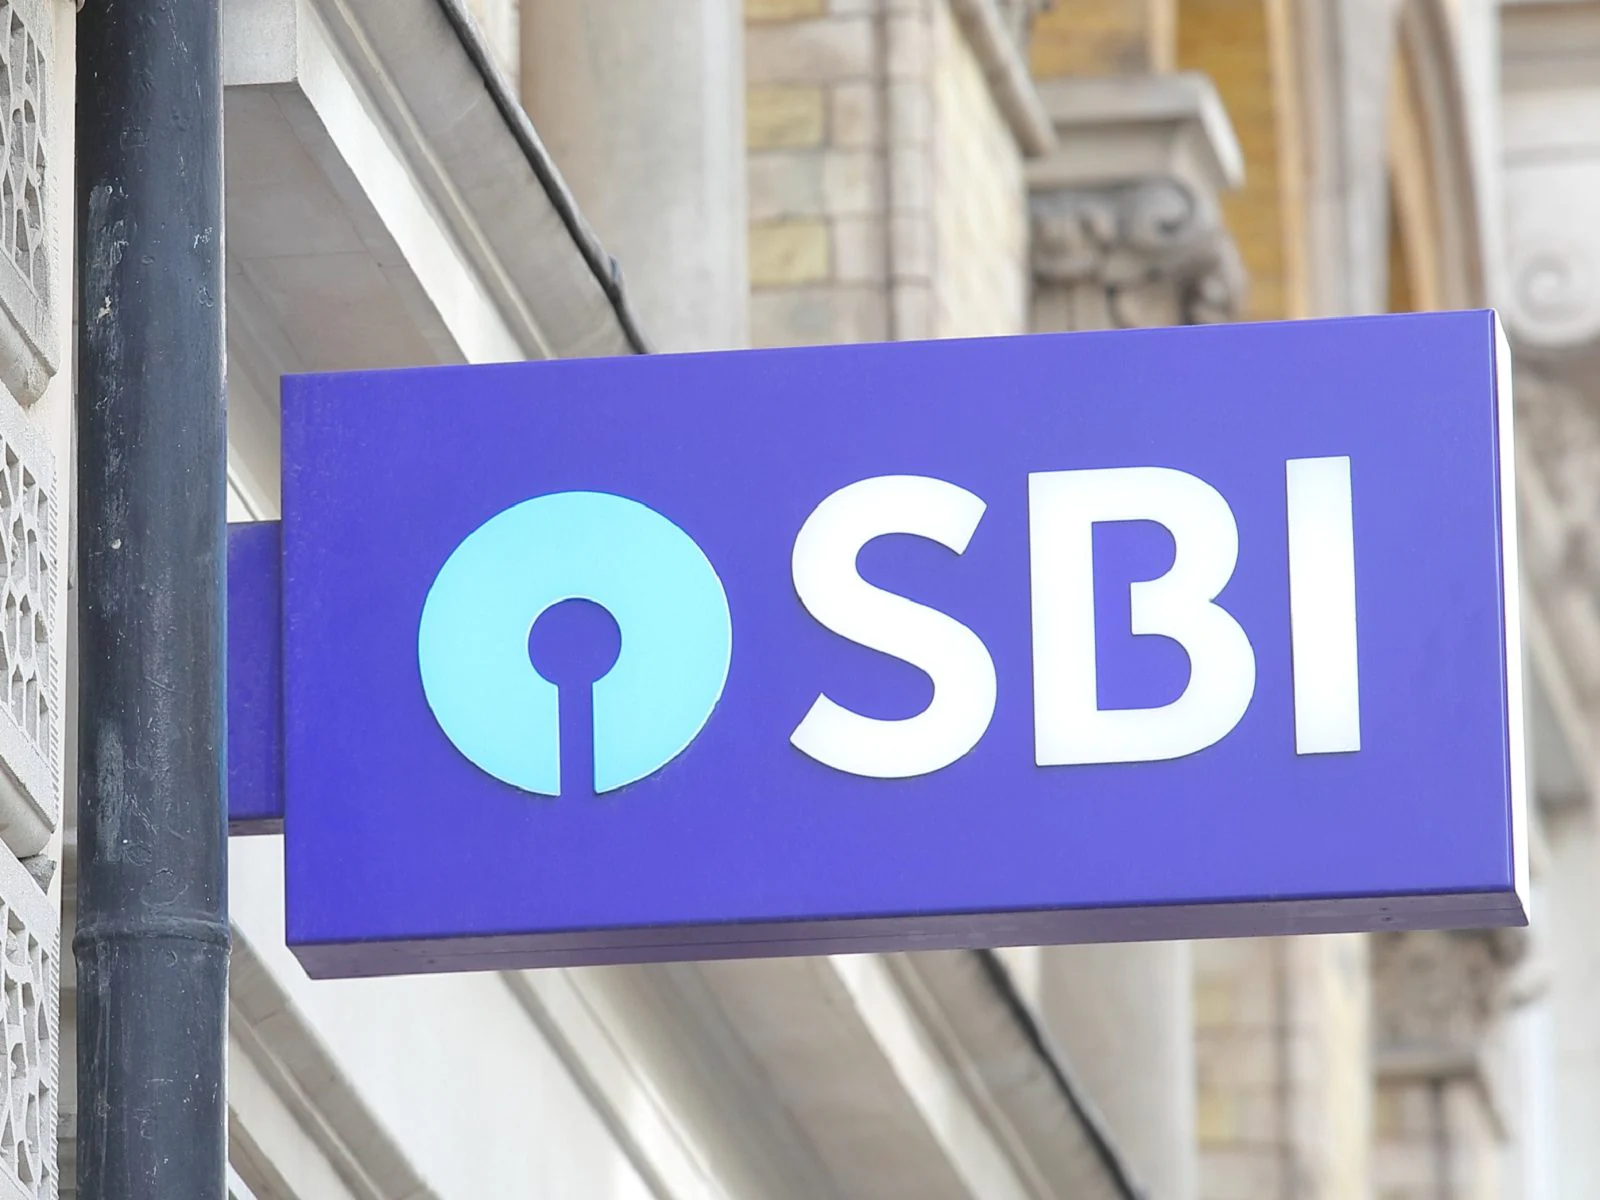 SBI FD Alert! State Bank of India hikes fixed deposit interest rates for these tenors: Check latest rates